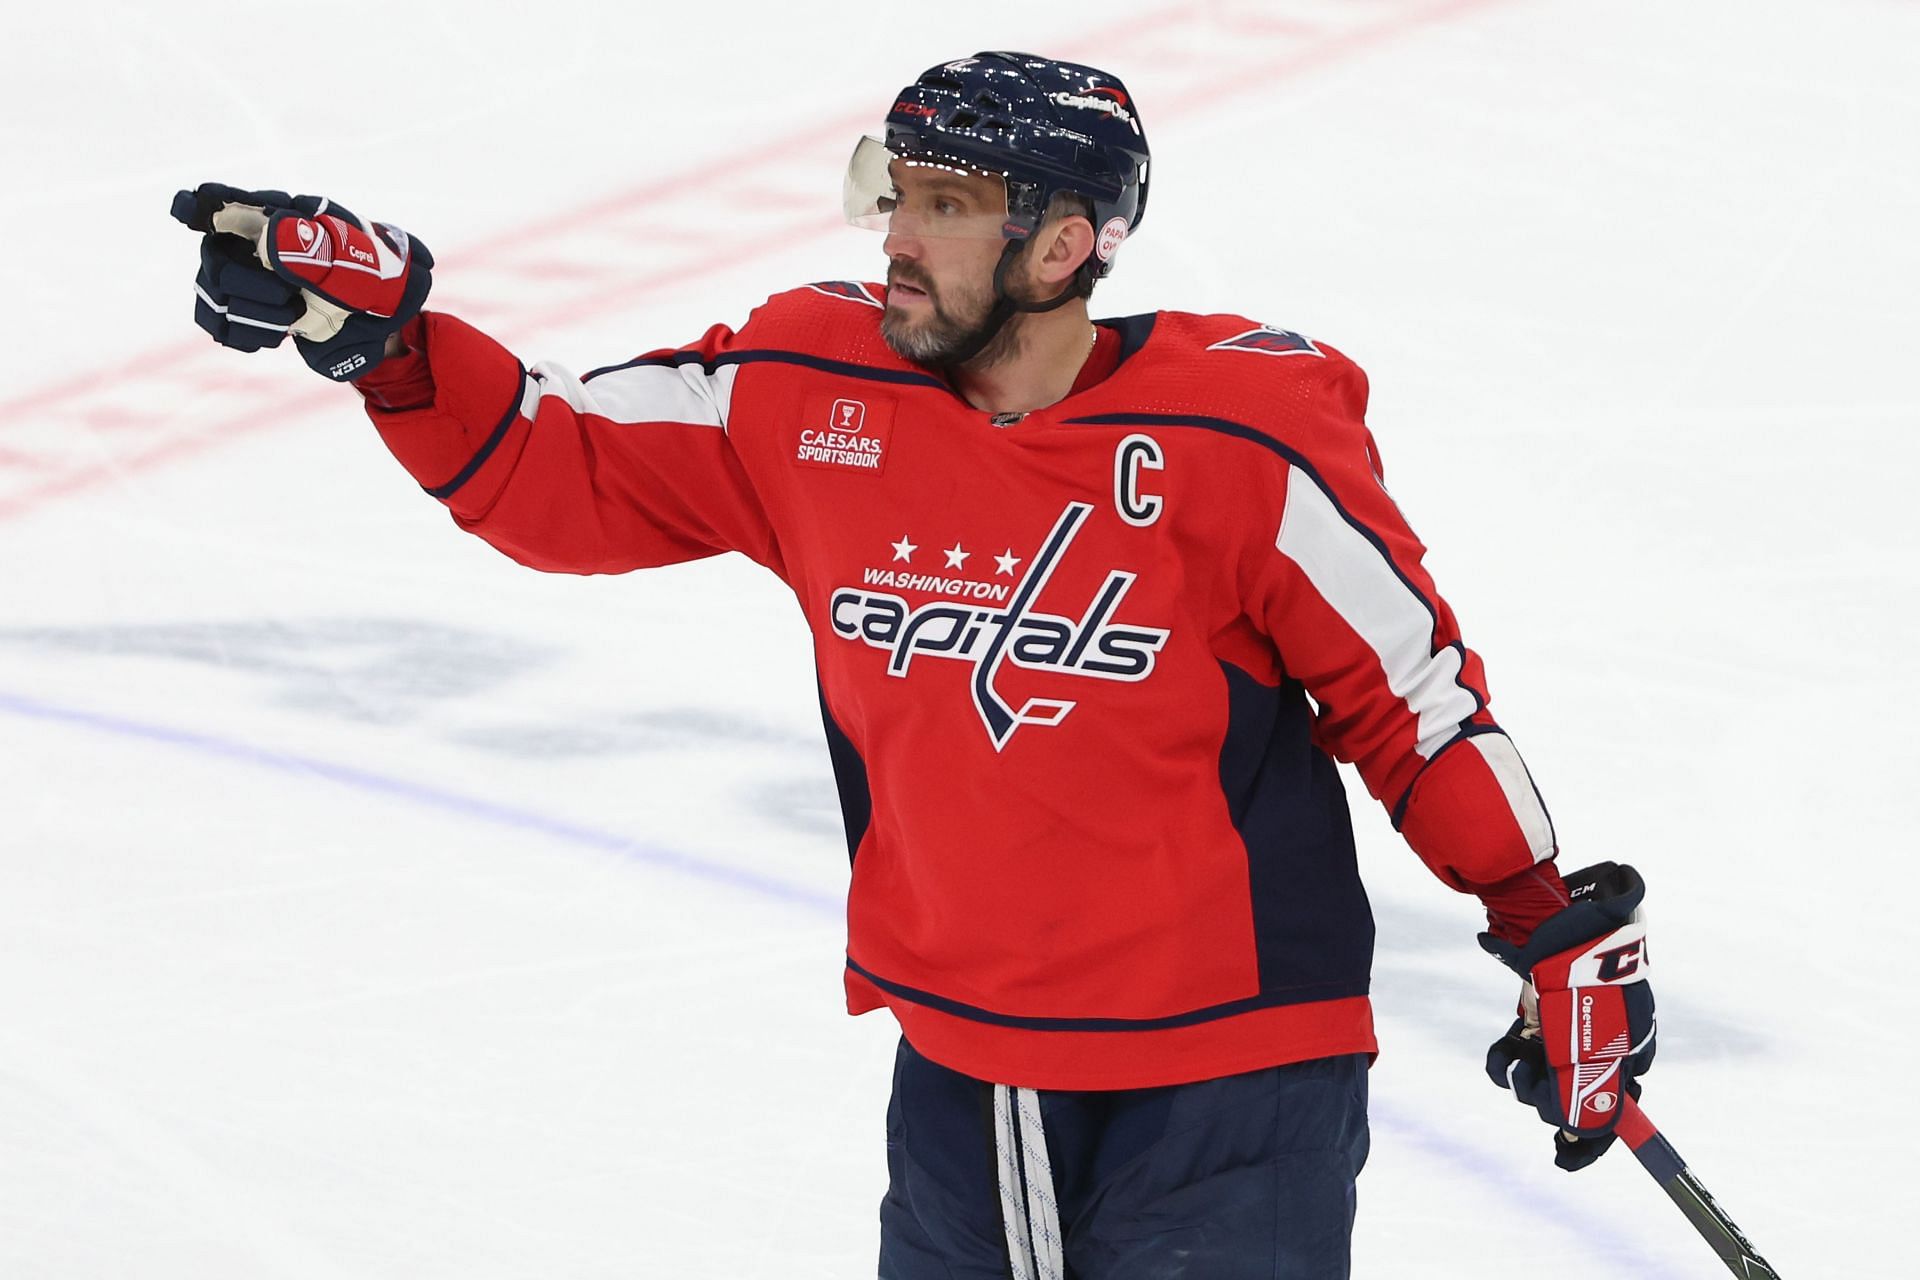 Amidst Terrible Personal Loss, Alex Ovechkin Finally Returning to